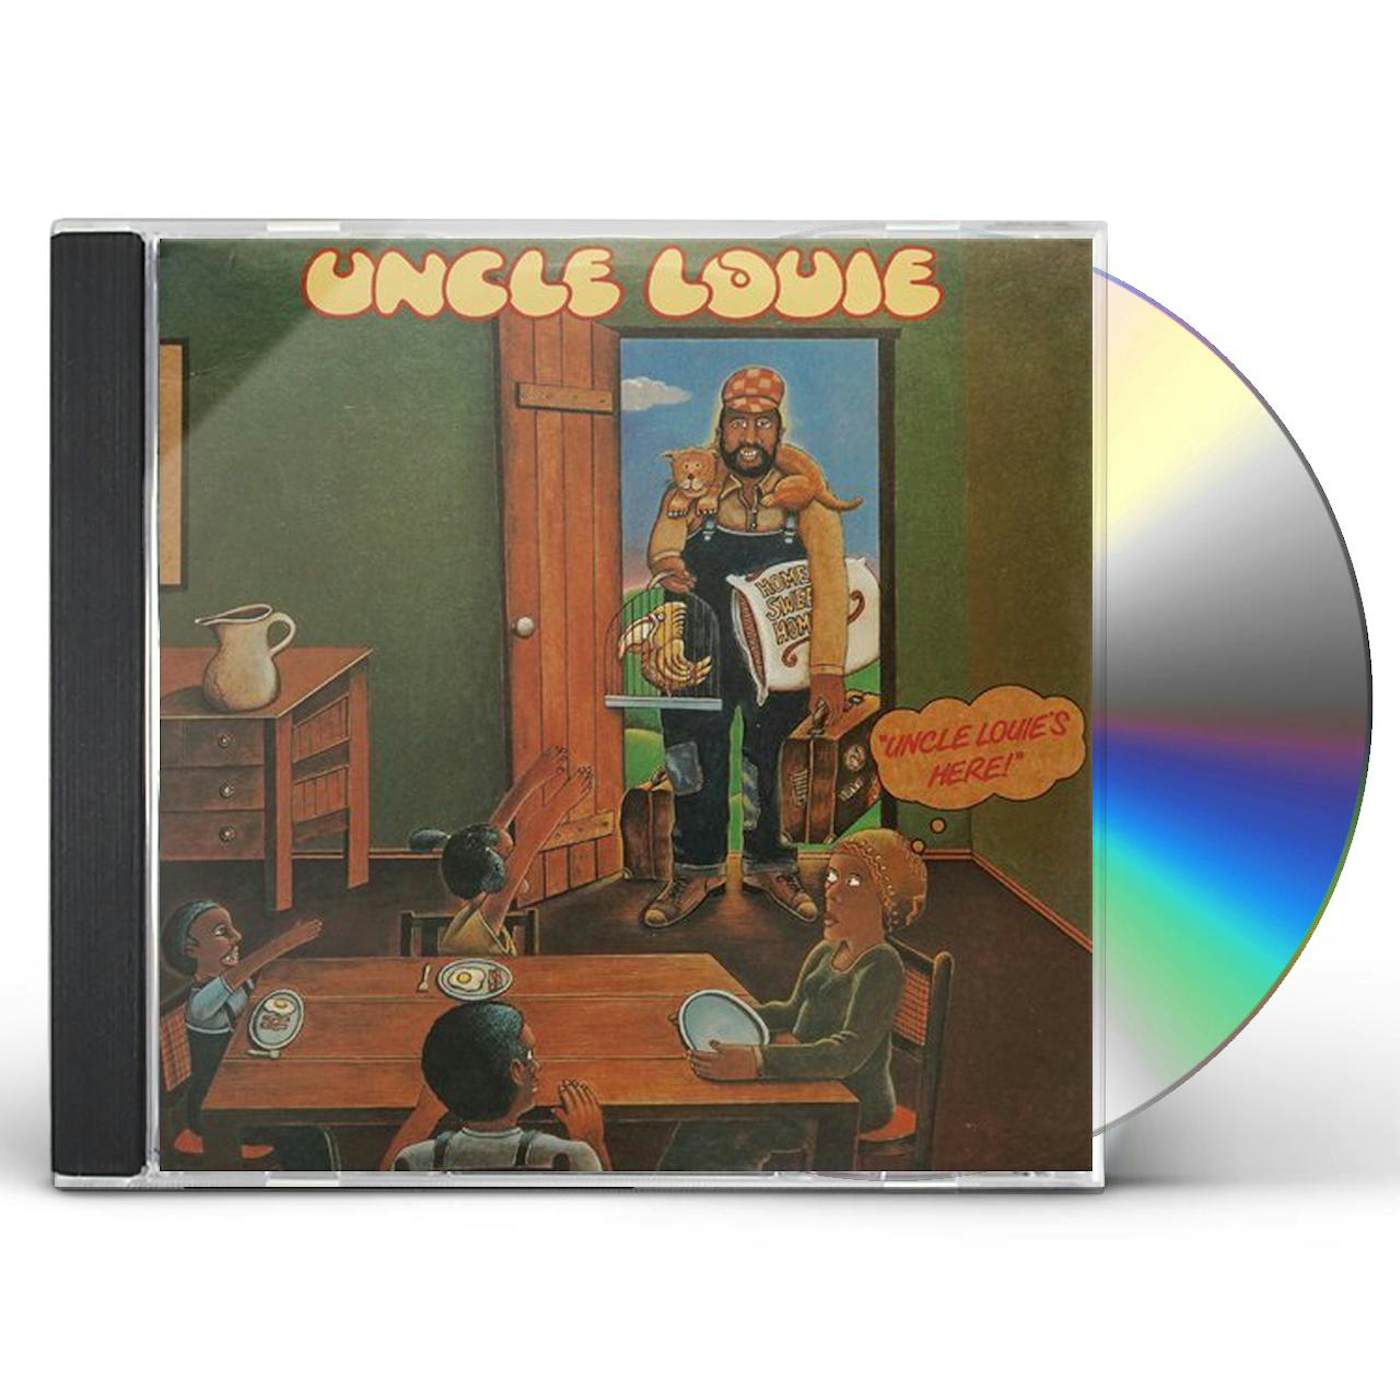 UNCLE LOUIE'S HERE CD